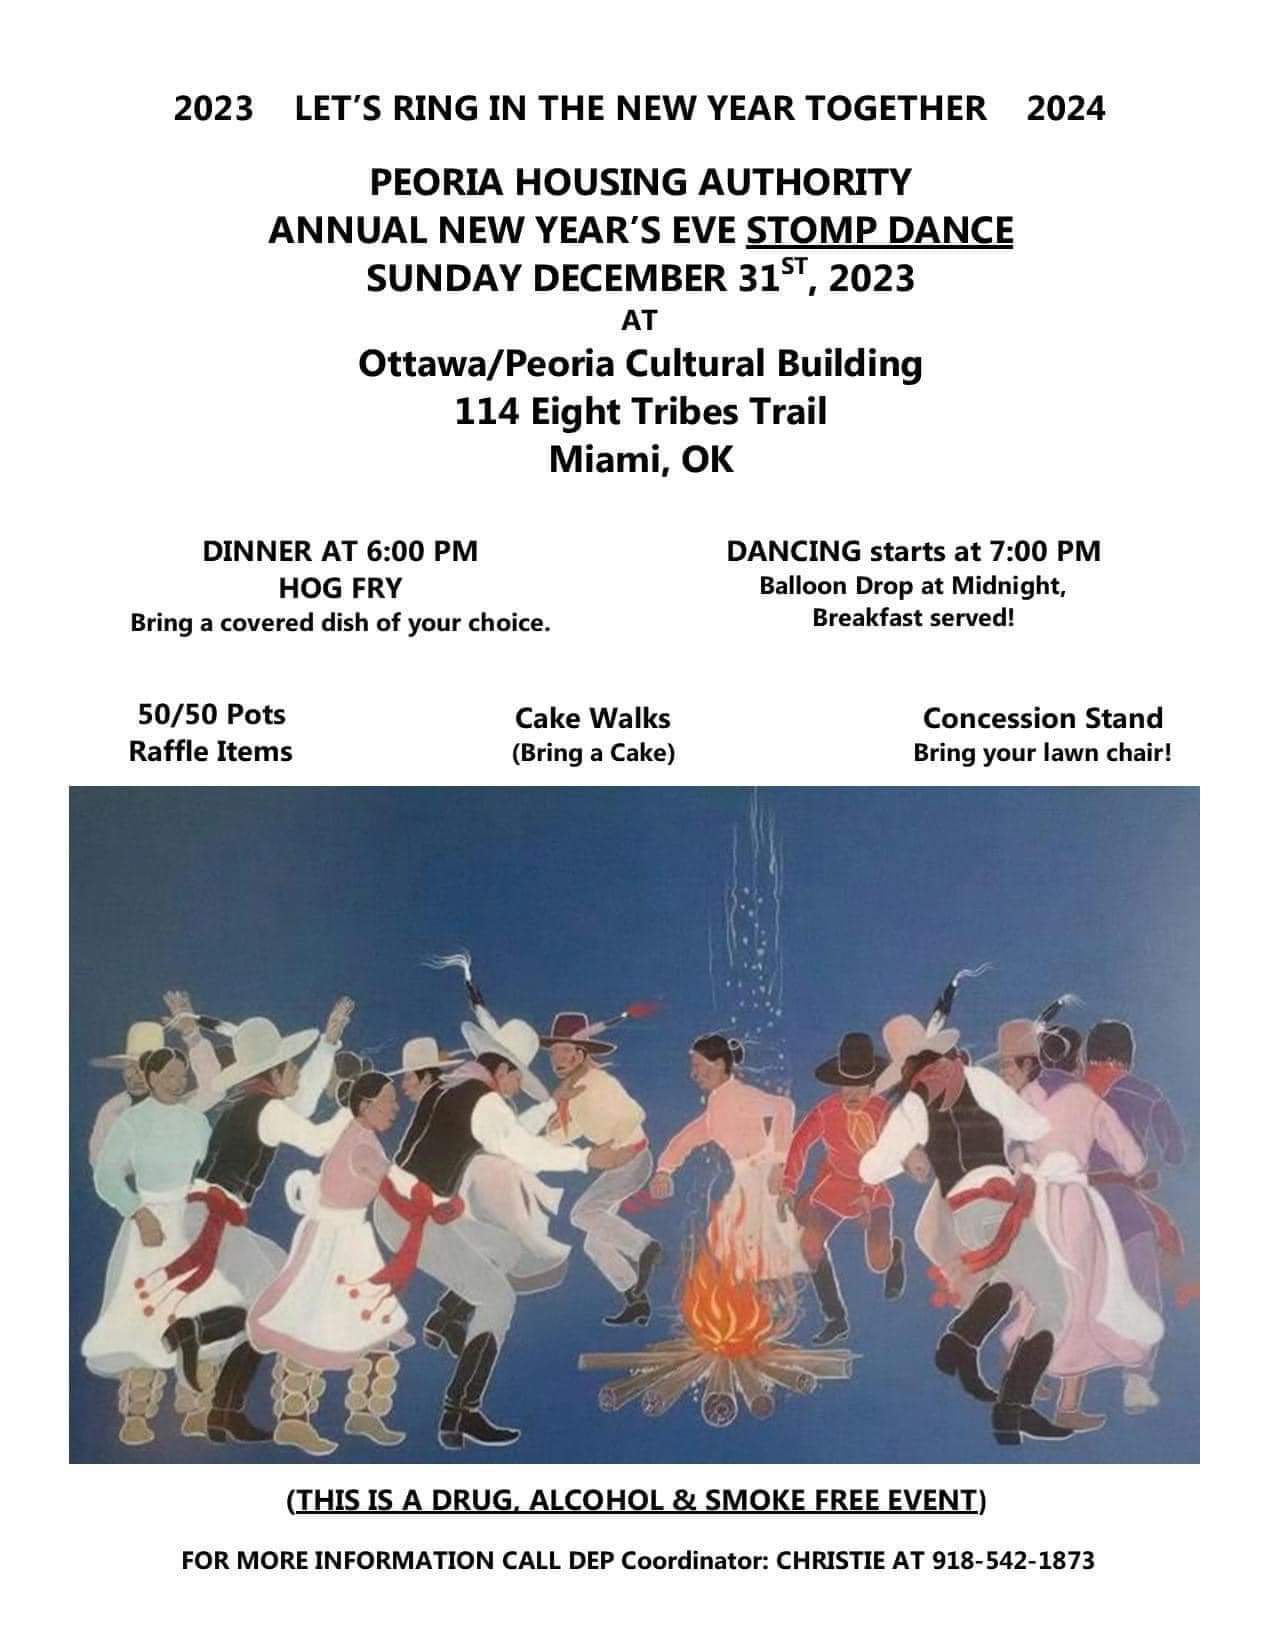 Peoria Housing Authority Annual New Year's Eve Stomp Dance 2023